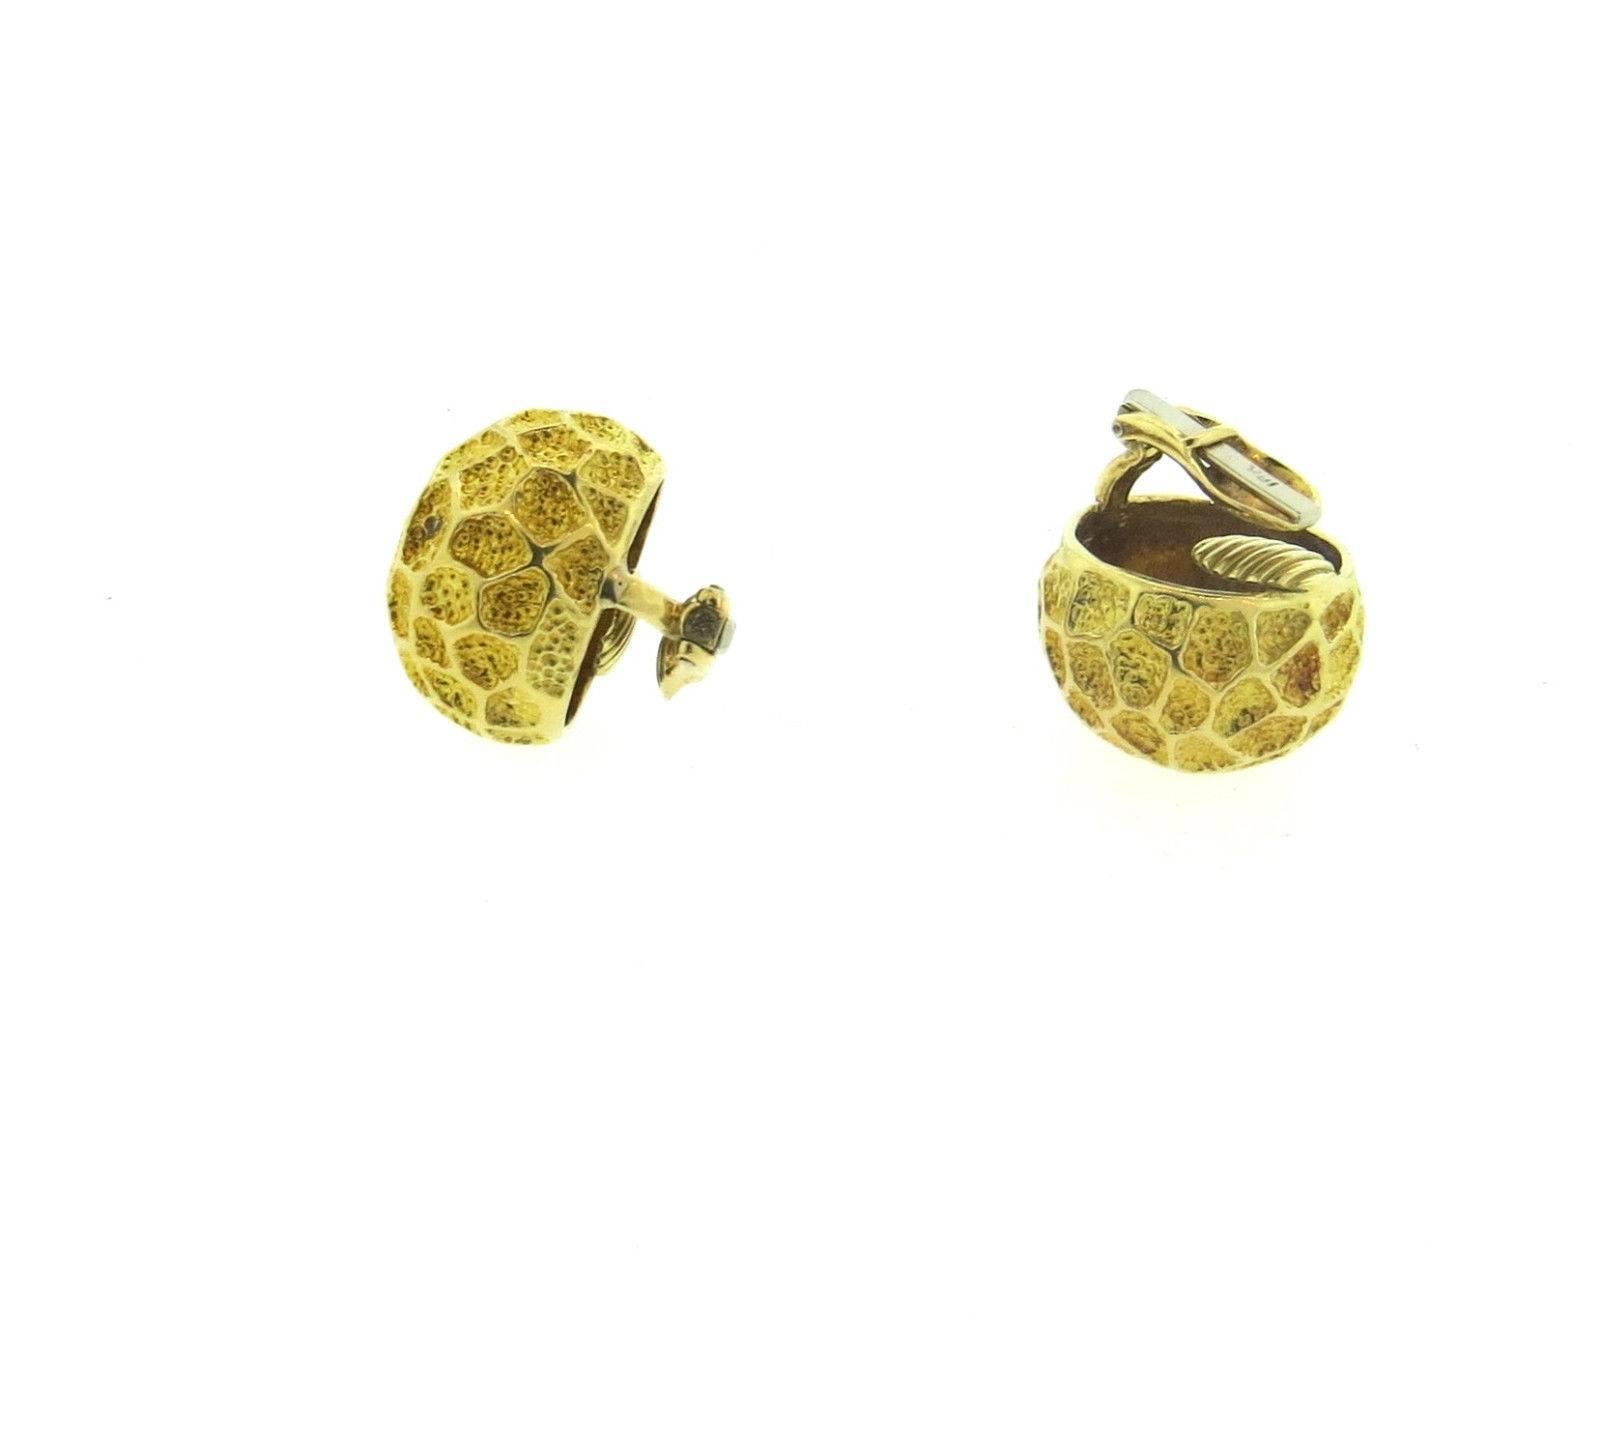 A pair of 18k yellow gold earrings designed in a honeycomb fashion.  Crafted by Tiffany & Co, the earrings measure 20mm in diameter and weigh 26.3 grams.  Marked: Tiffany & Co, 18k